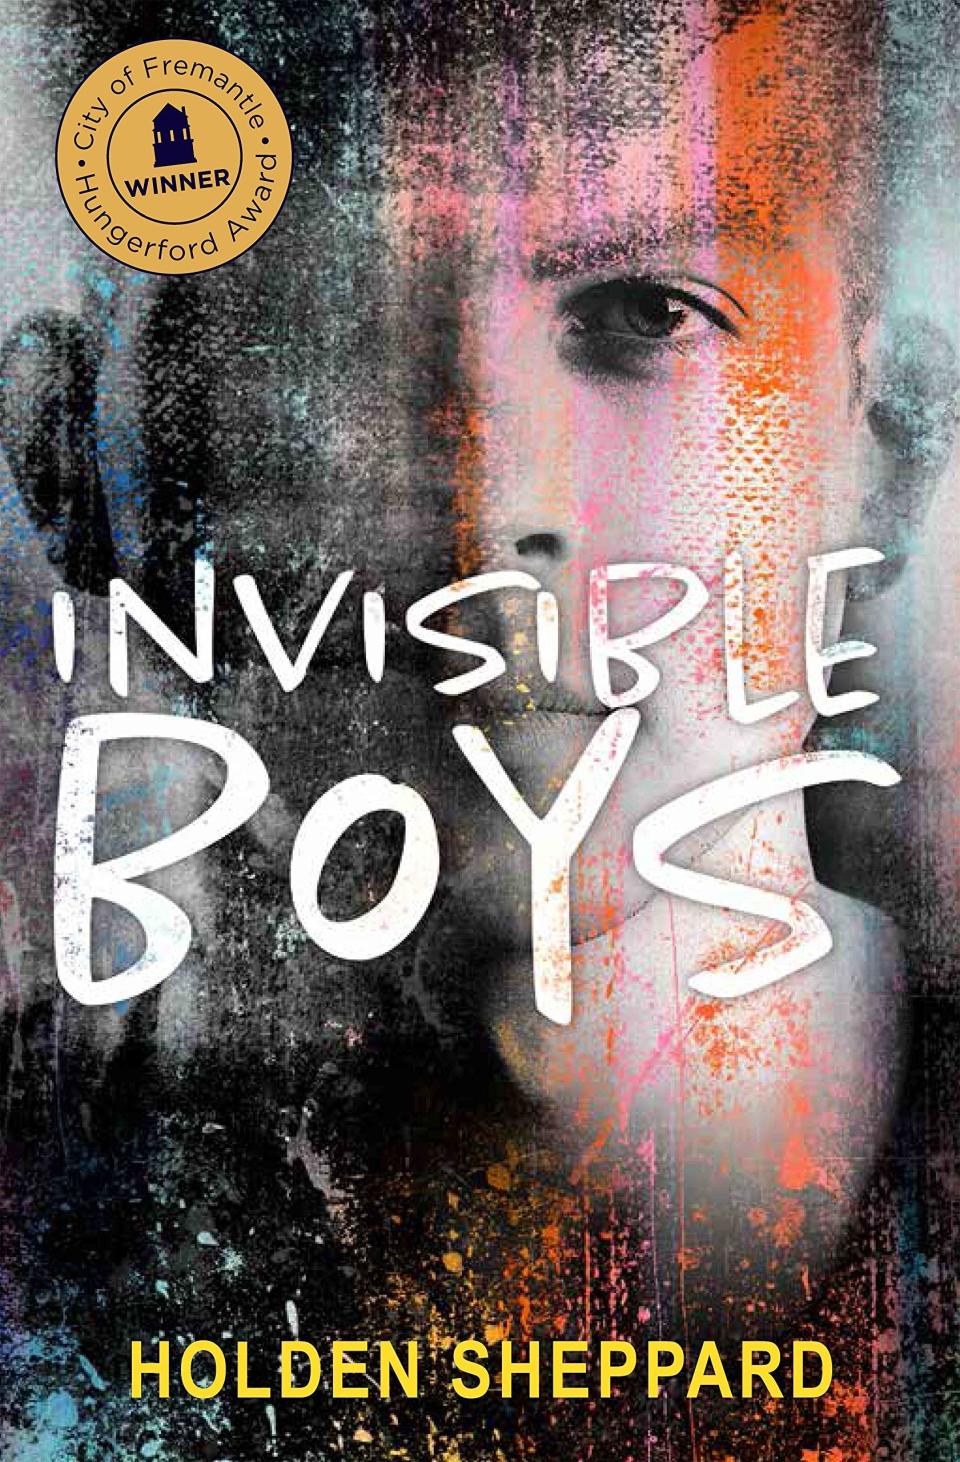 Book cover of "Invisible boys"